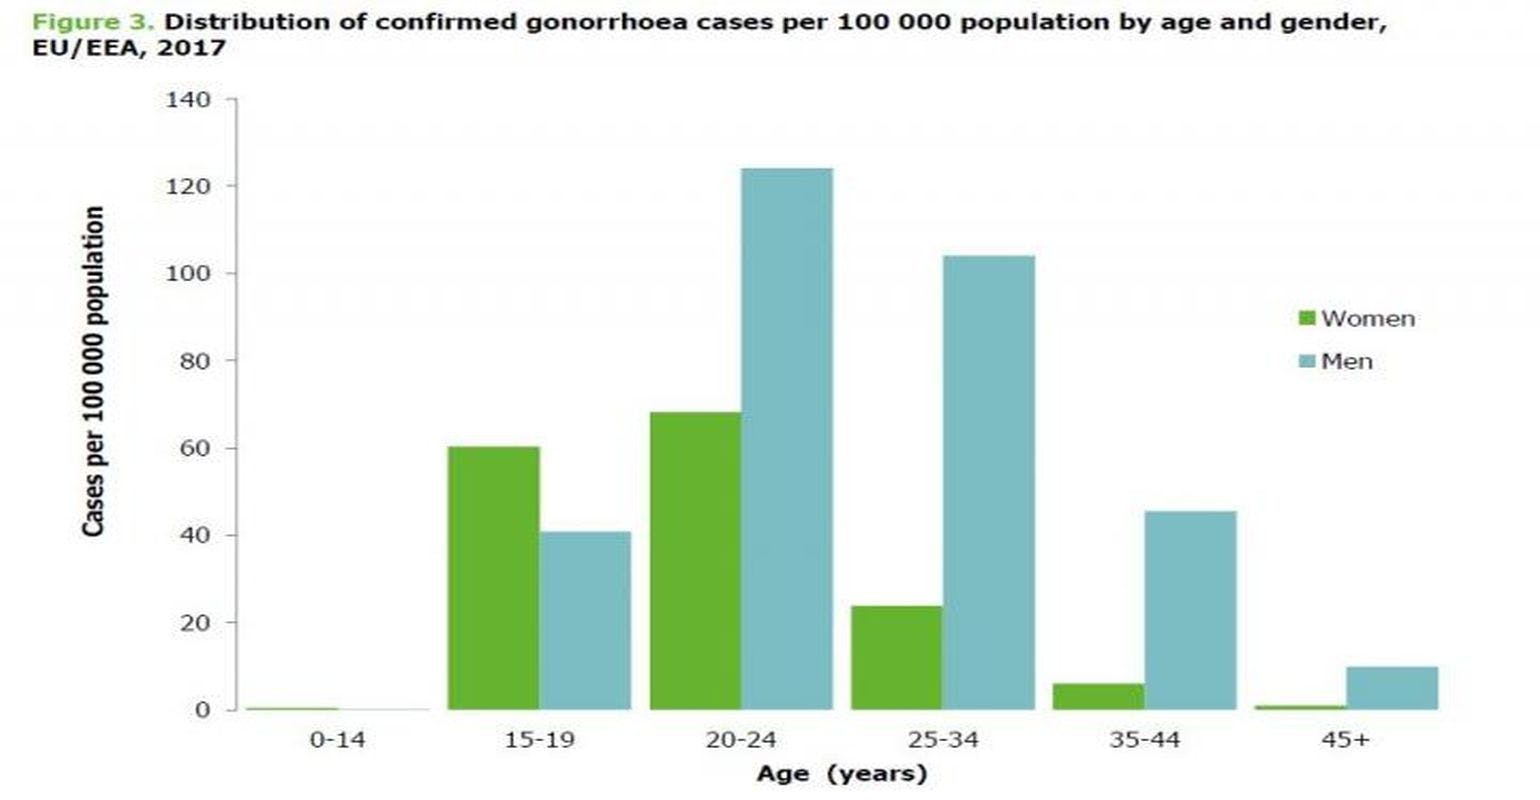 Gonorrhea Cases on the Rise Across Europe